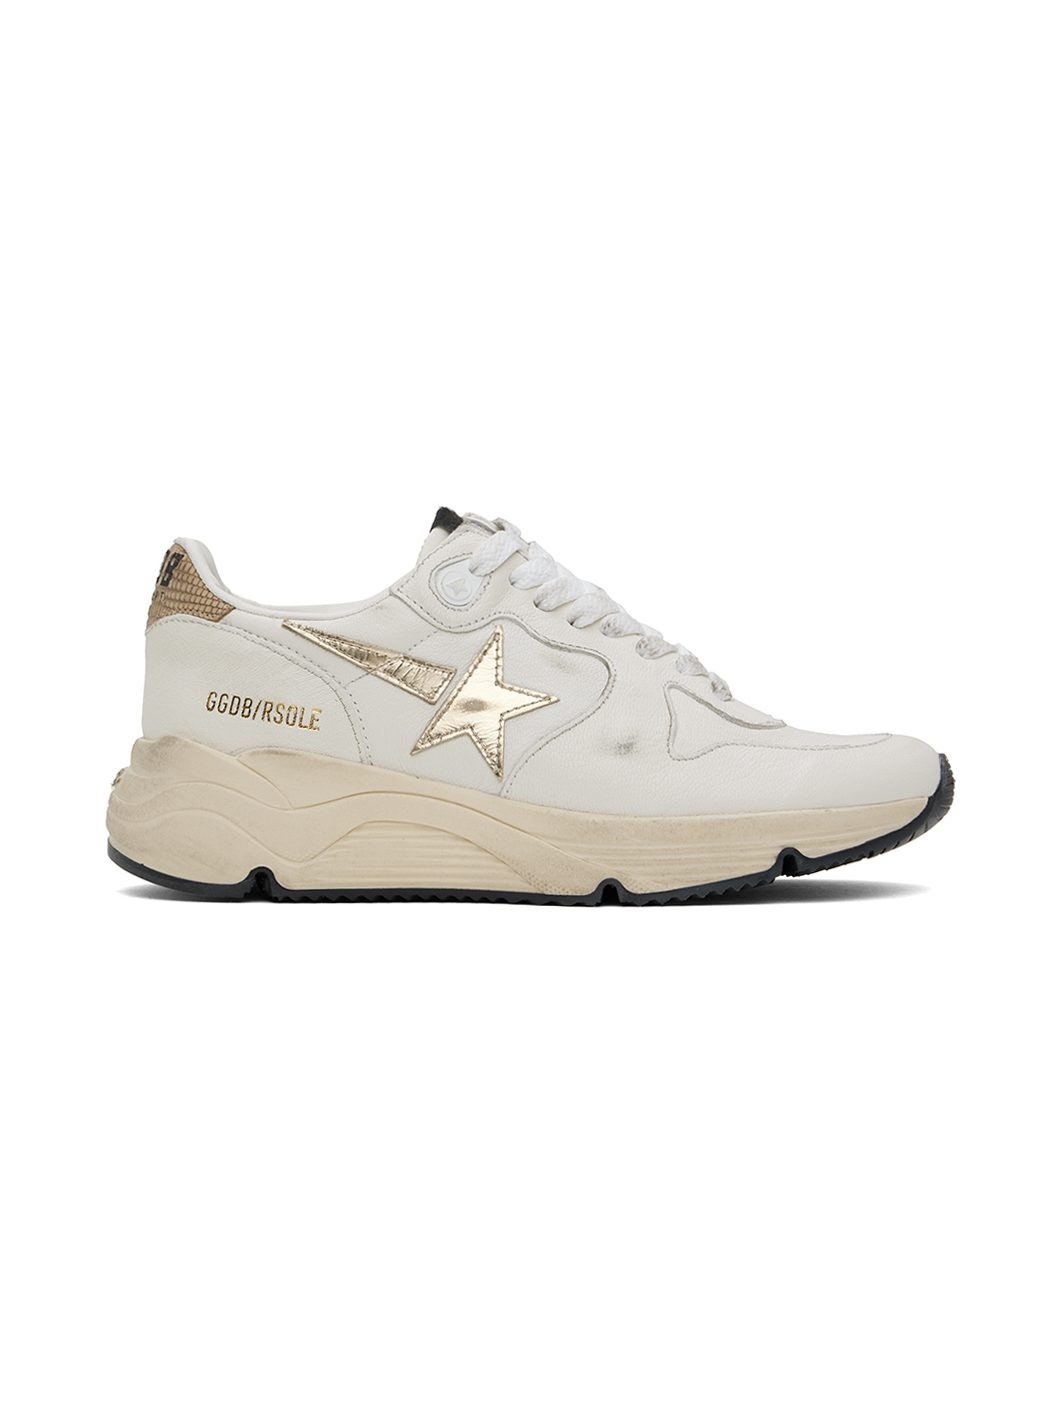 Off-White & Beige Running Sole Sneakers - 1